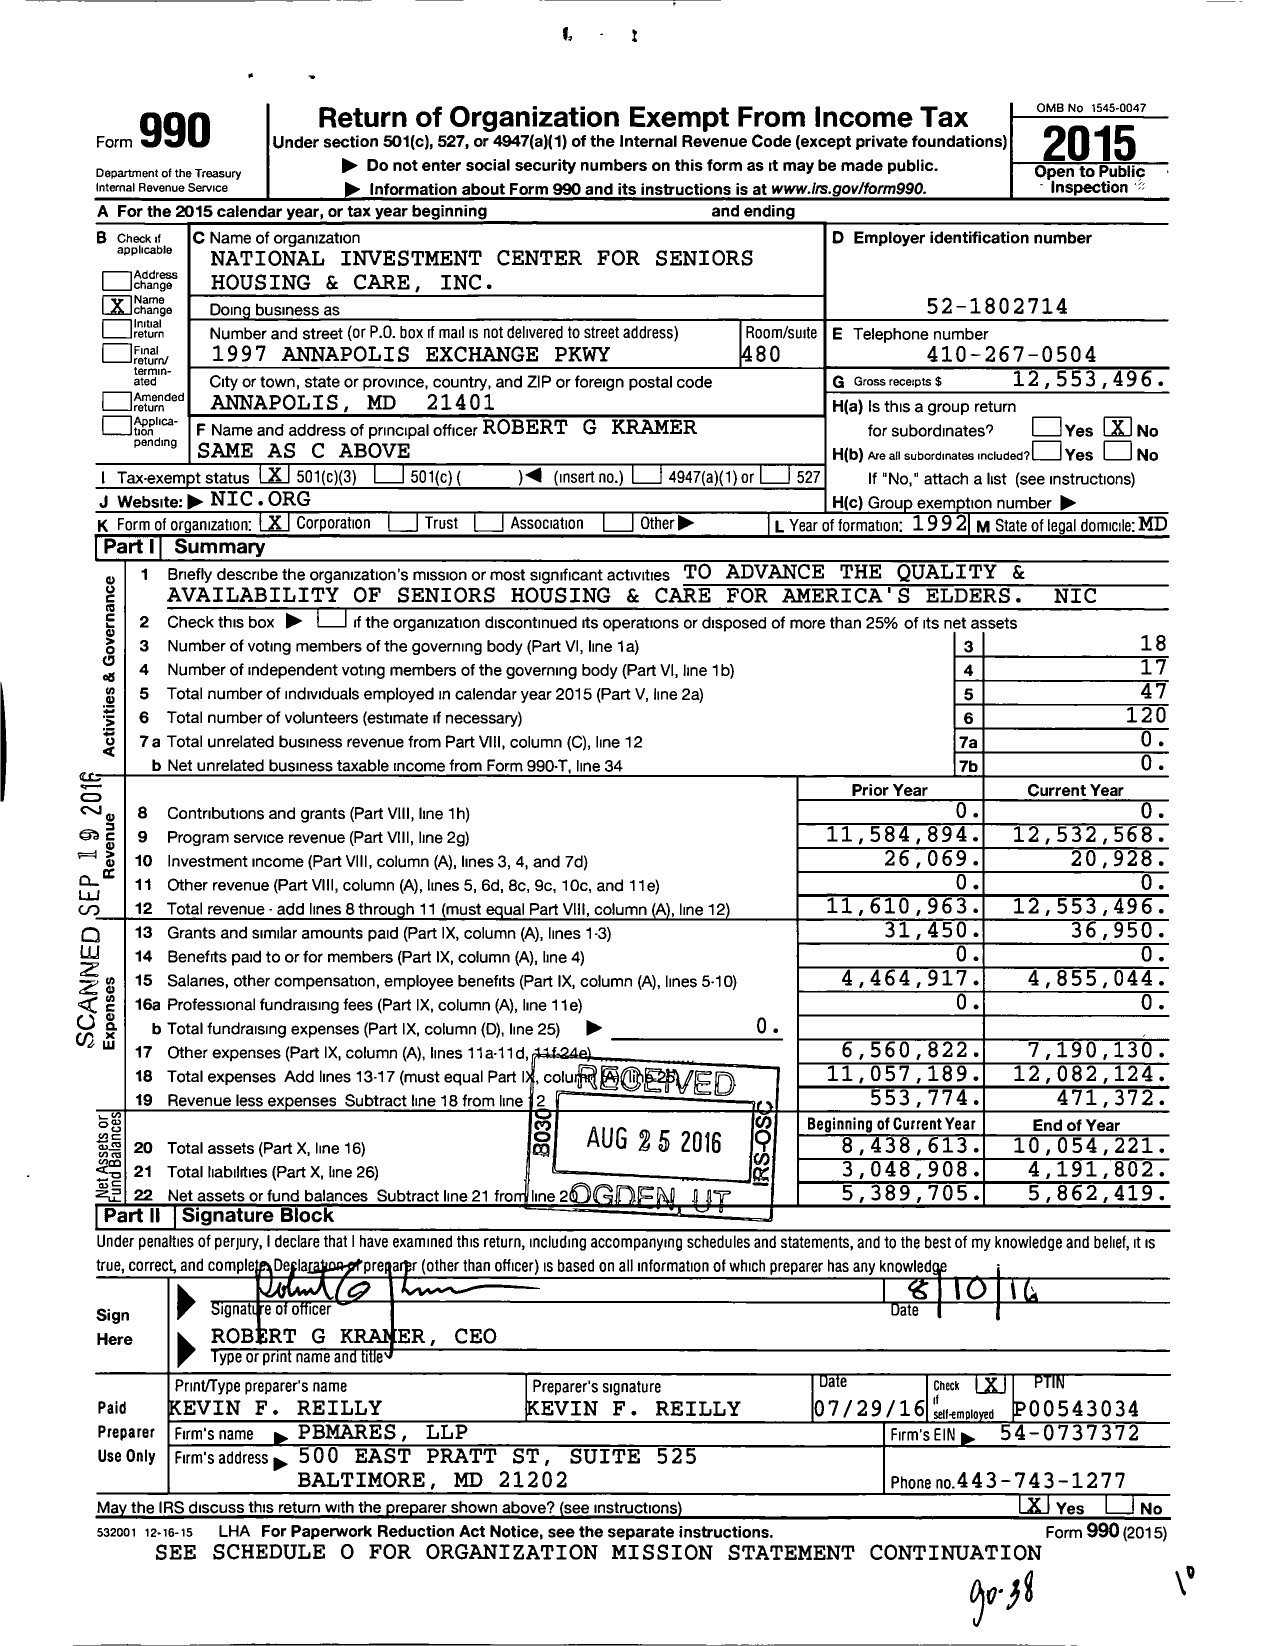 Image of first page of 2015 Form 990 for National Investment Center for Seniors Housing and Care (NIC)